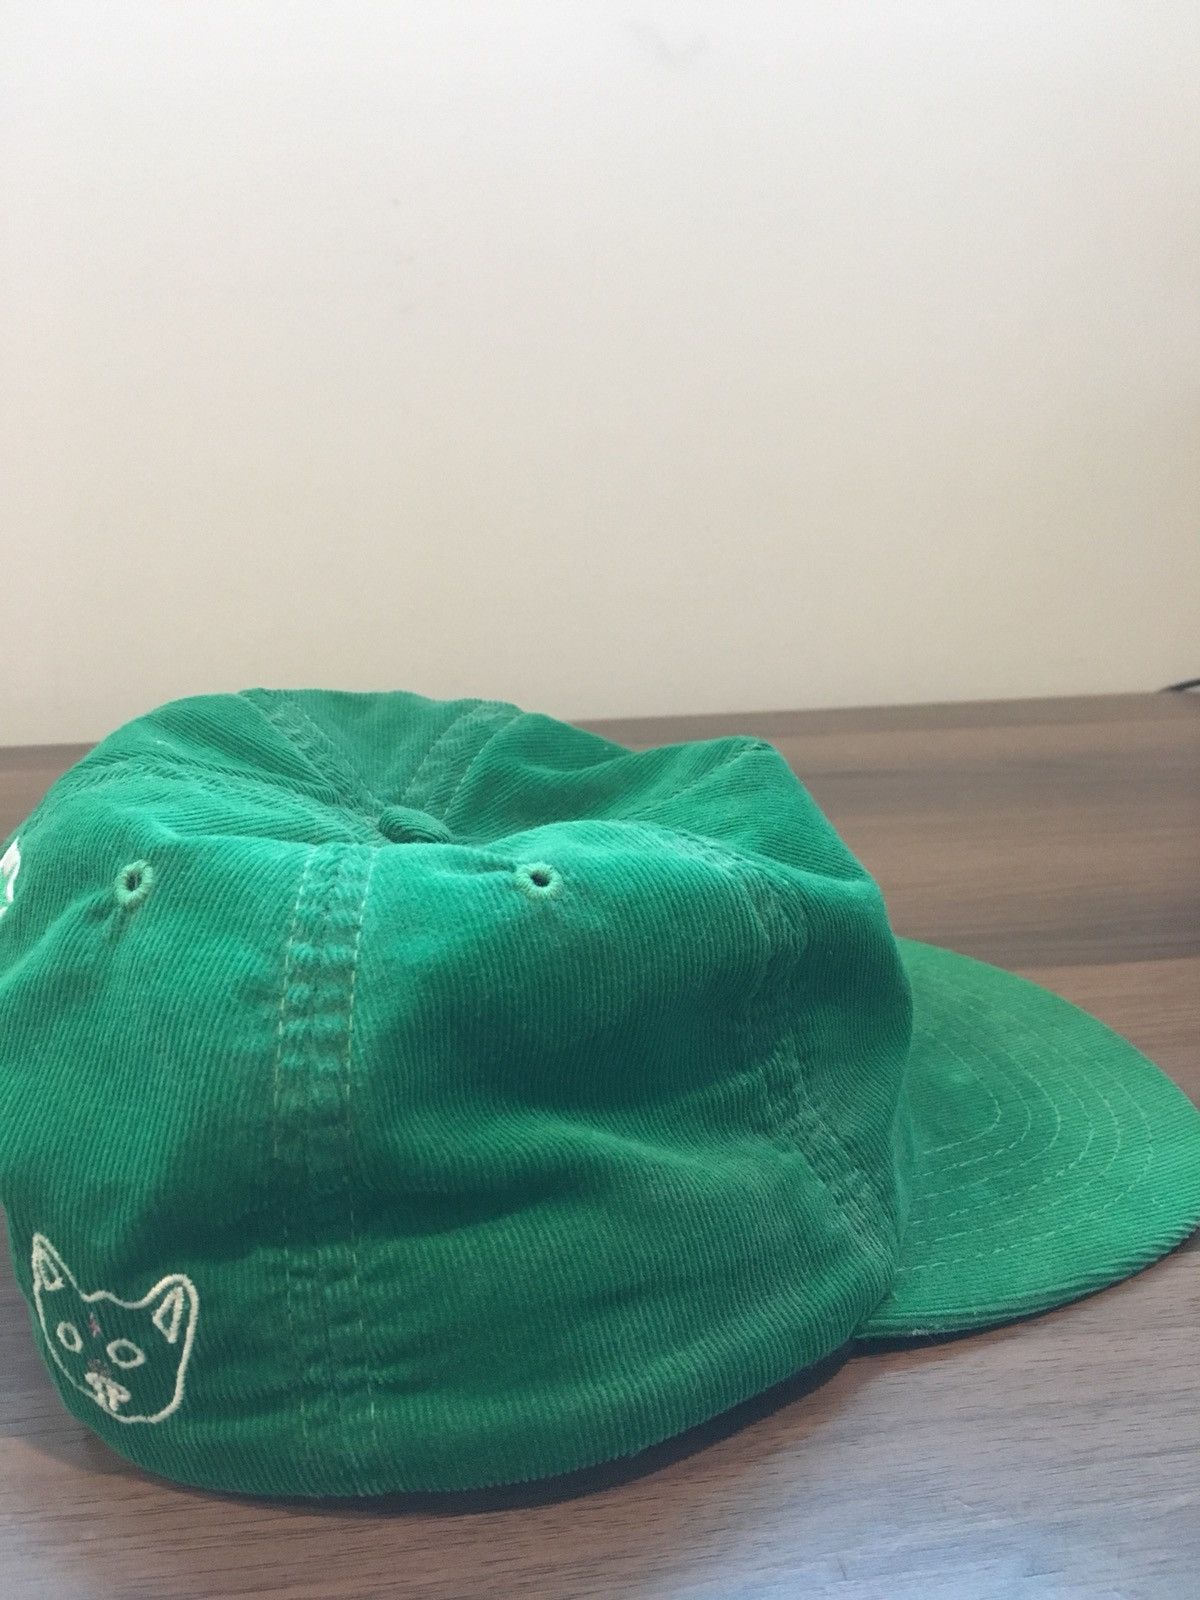 Golf Wang Green GOLF logo Hat - Sample Print Size ONE SIZE - 2 Preview